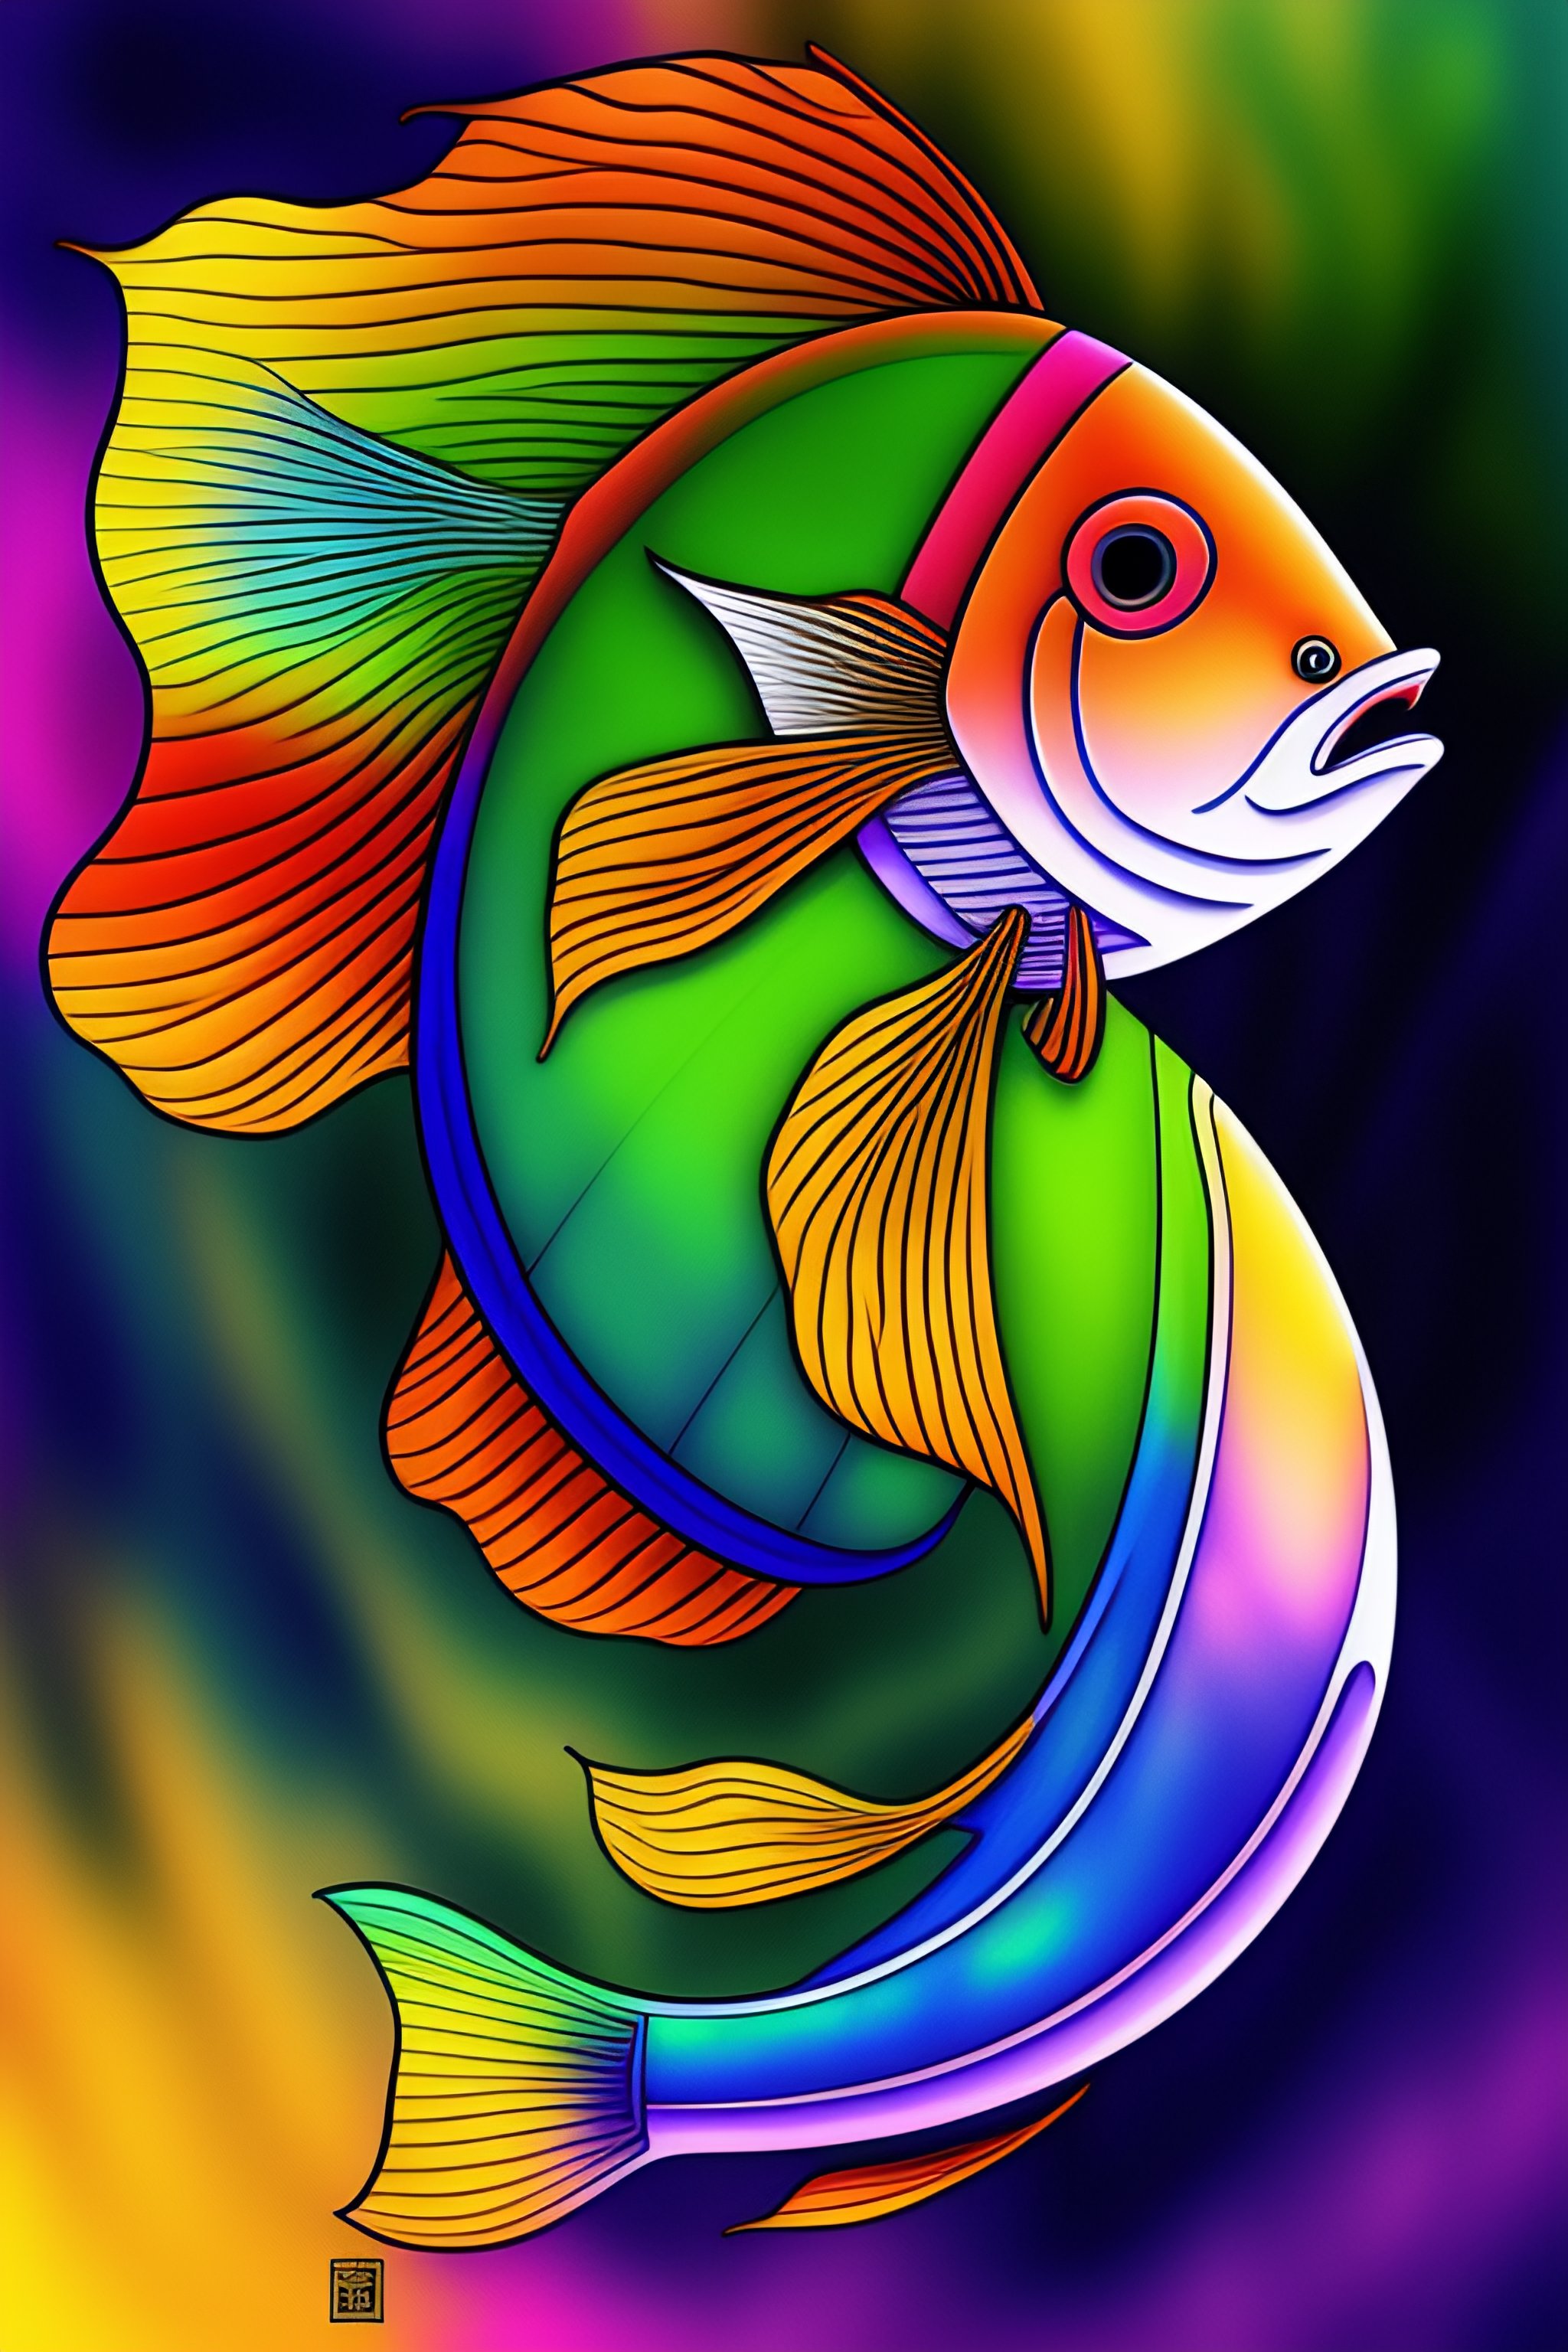 Lexica - Line drawing of a colorful fish